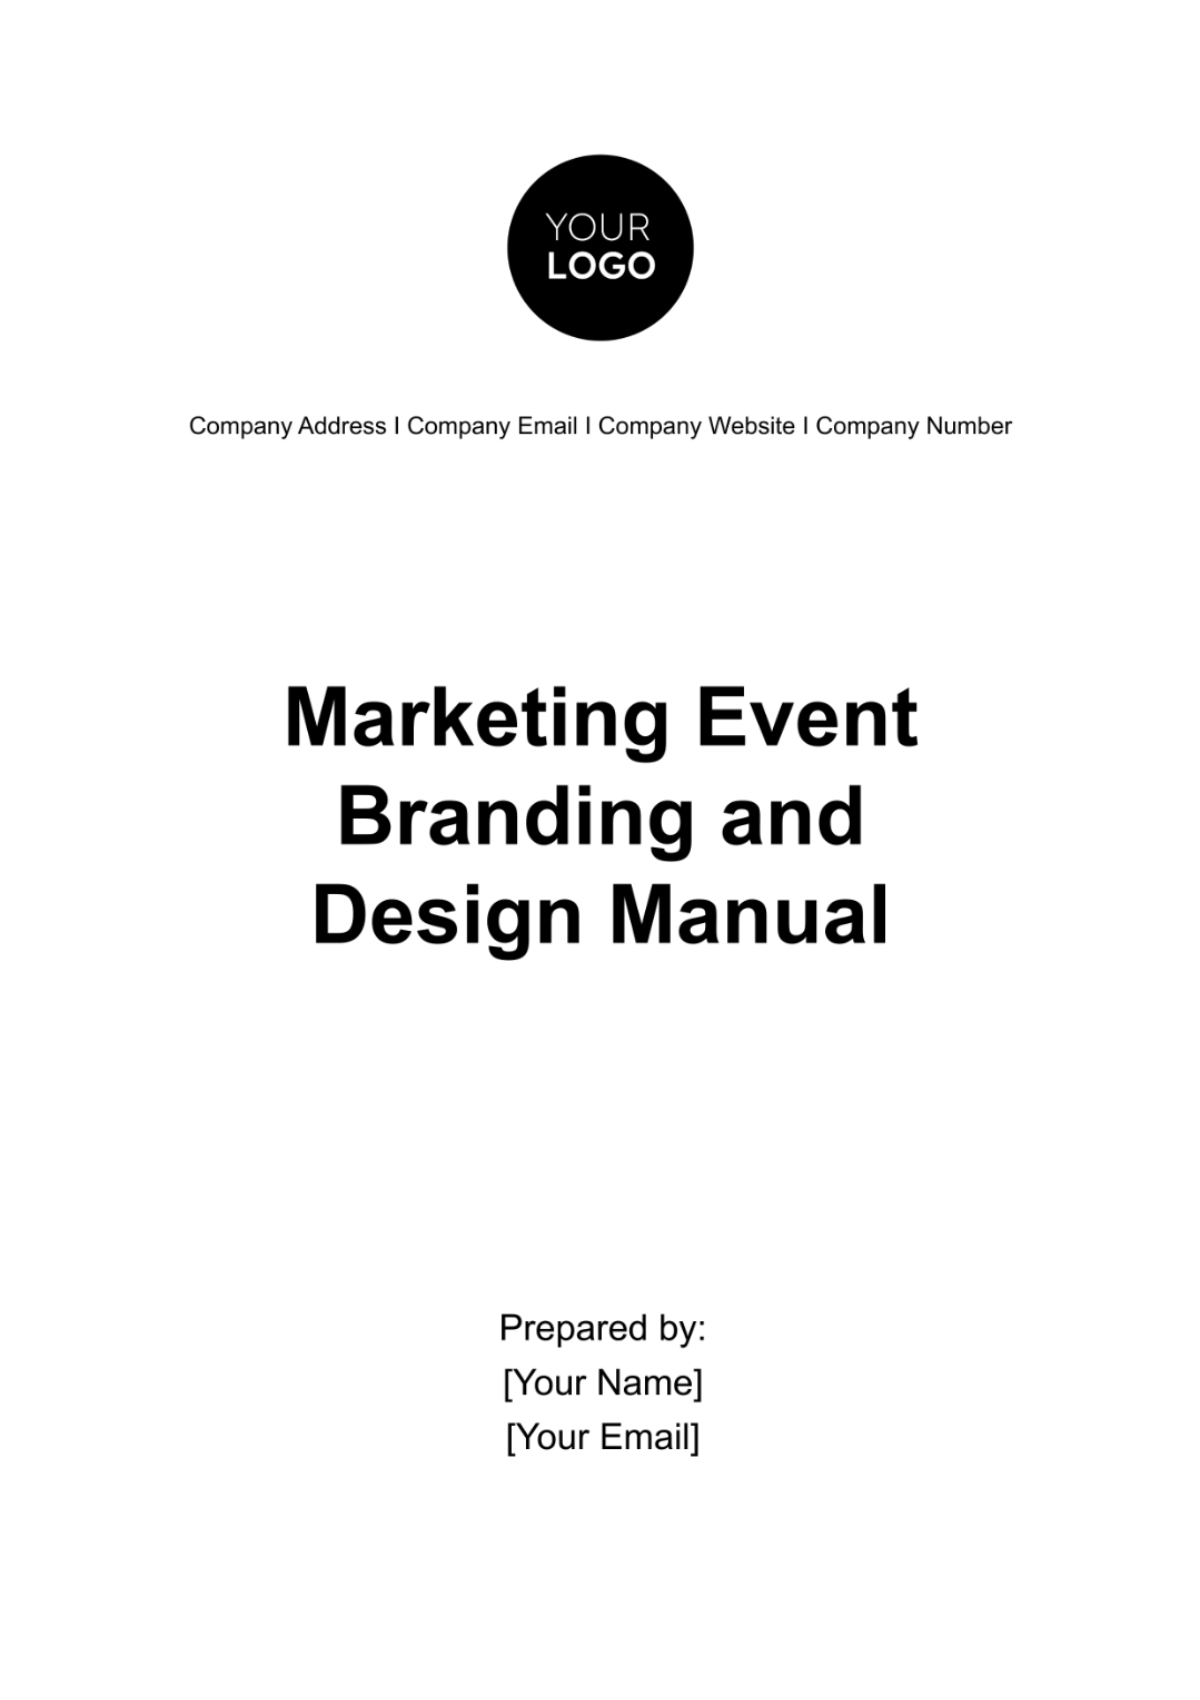 Free Marketing Event Branding and Design Manual Template